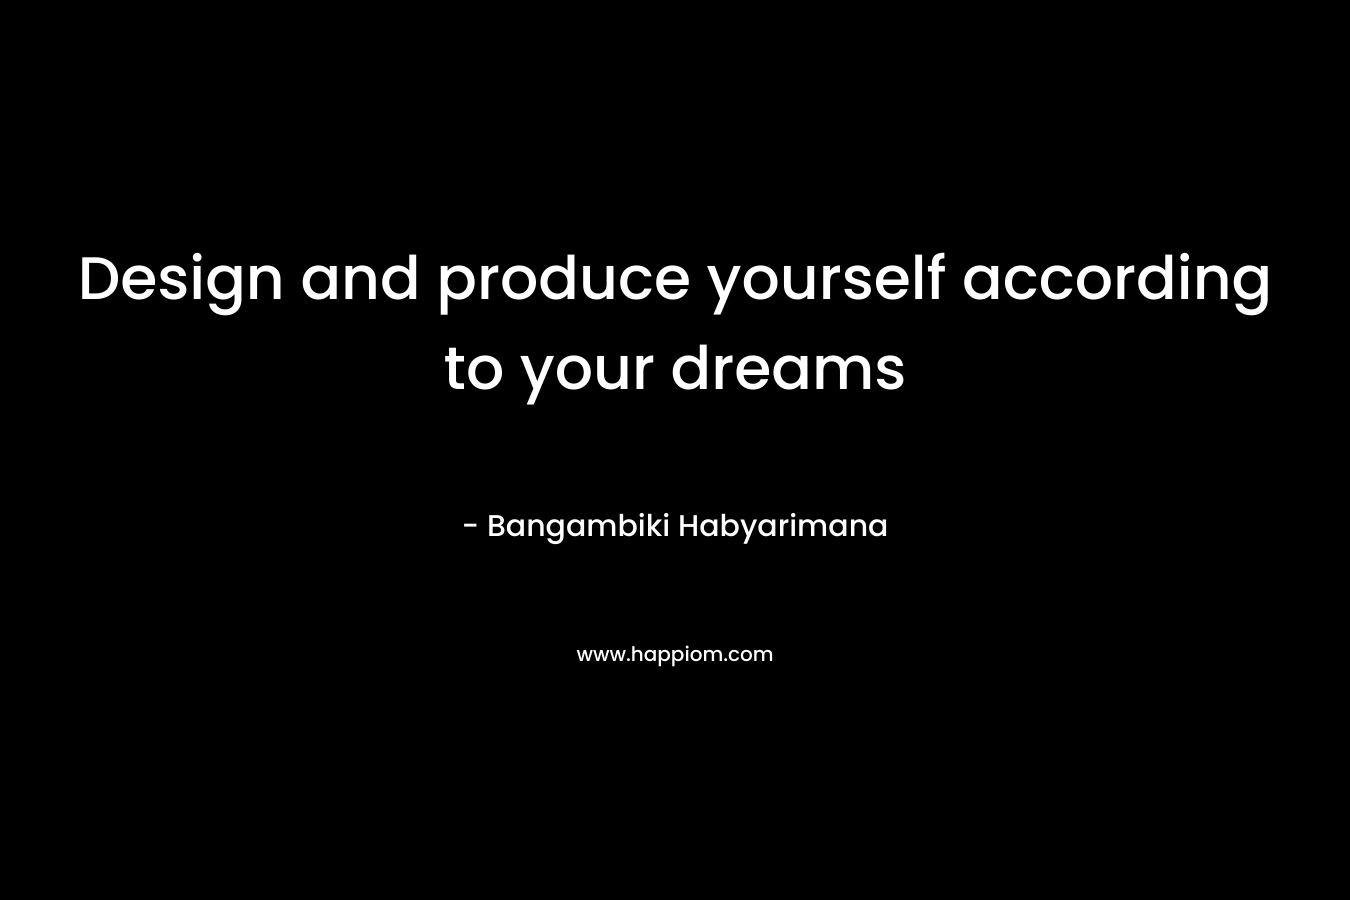 Design and produce yourself according to your dreams